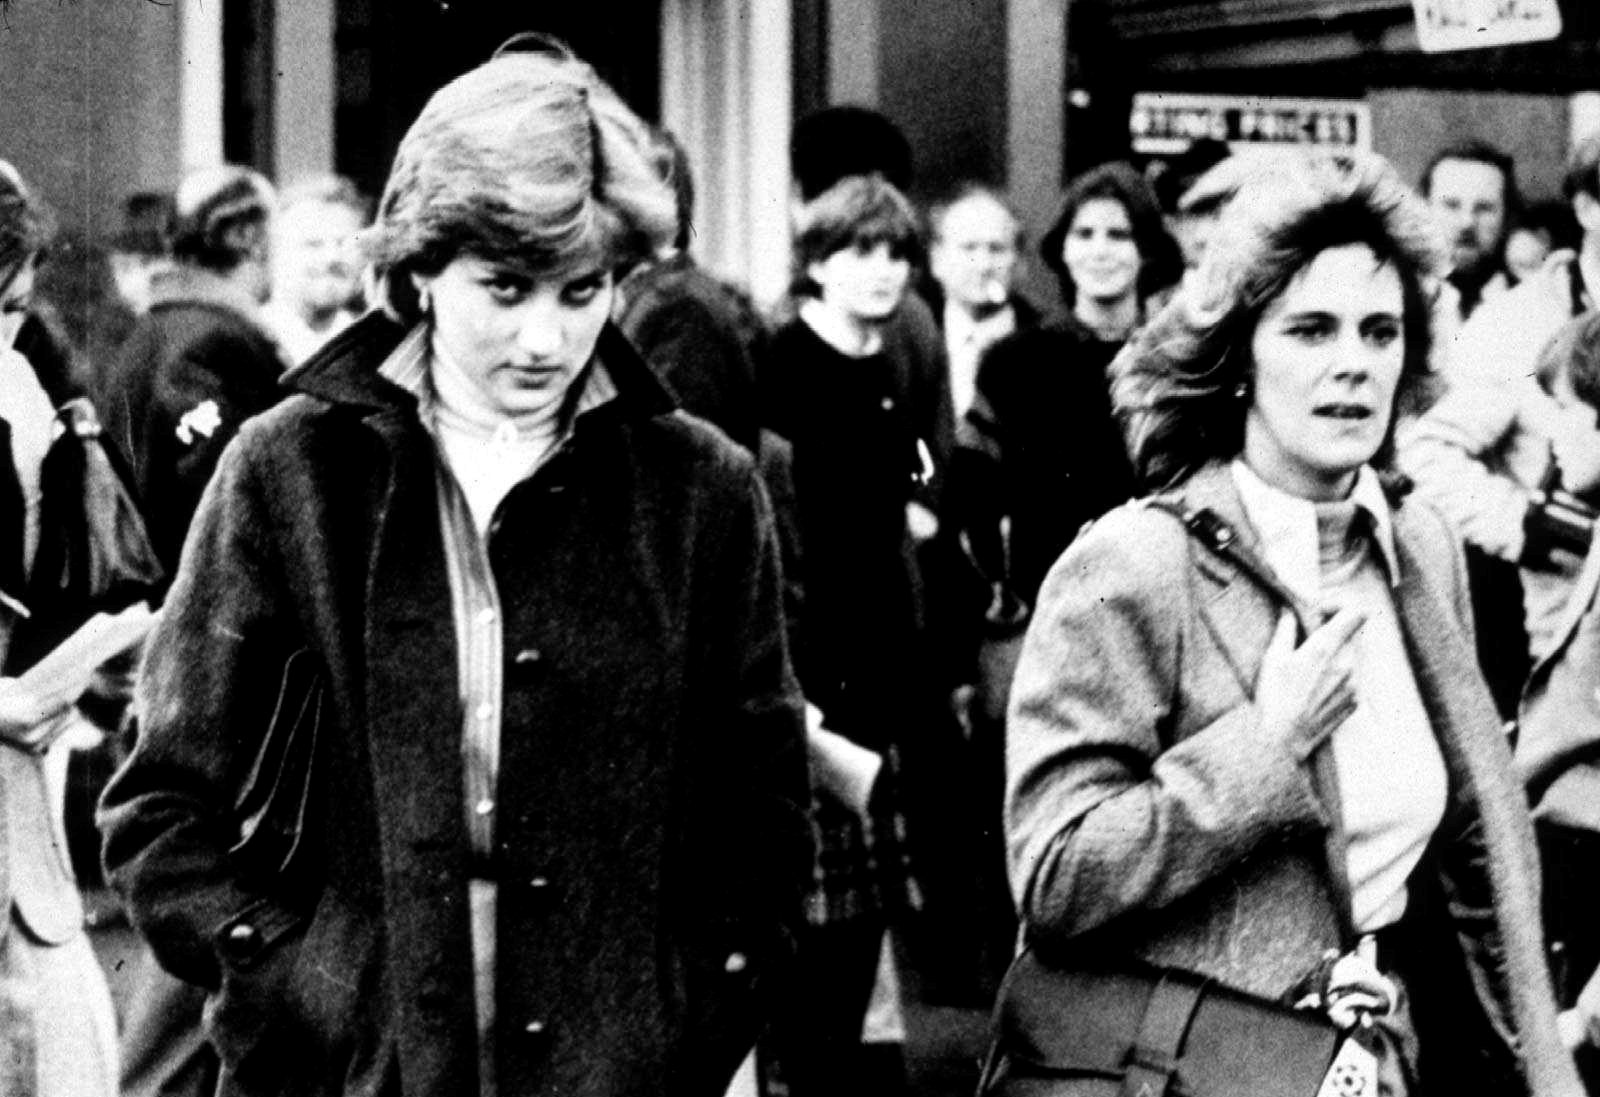 Lady Diana Spencer and Camilla Parker Bowles at Ludlow Races together (circa 1980)